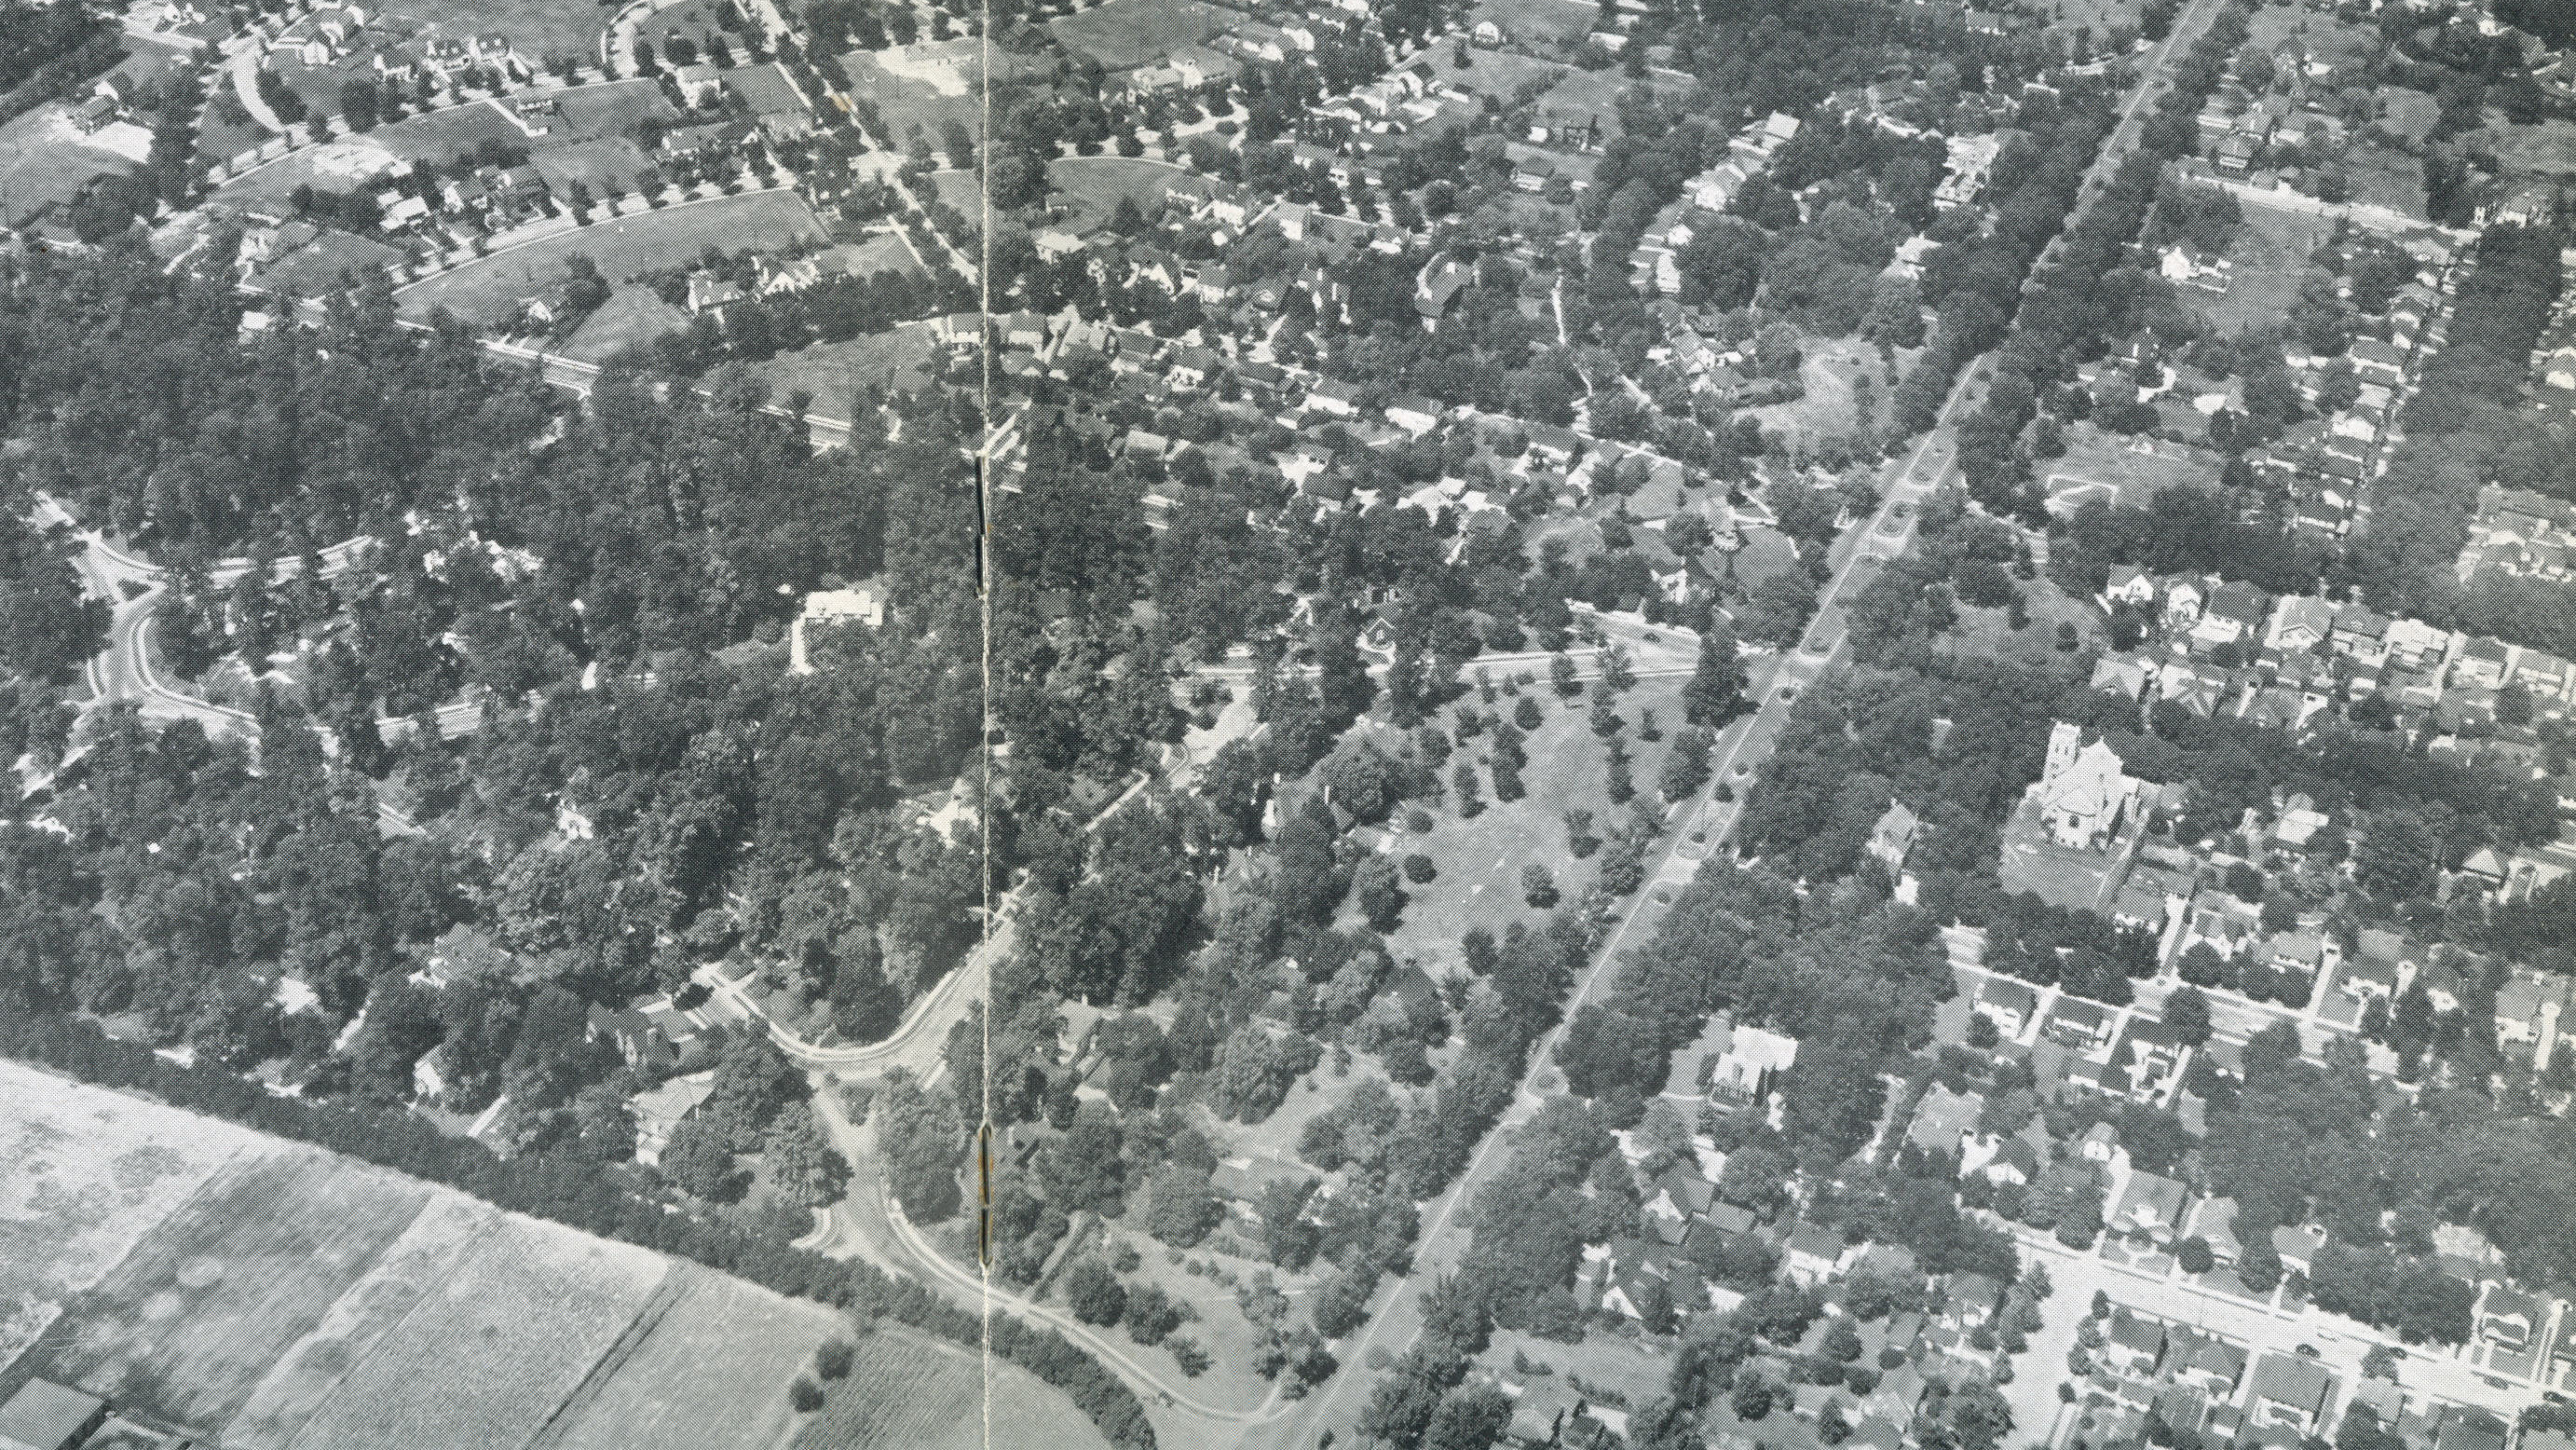 Harry Kissell’s exclusive Springfield, Ohio subdivision did not see a black homeowner until 1985. Photo provided by The Turner Foundation